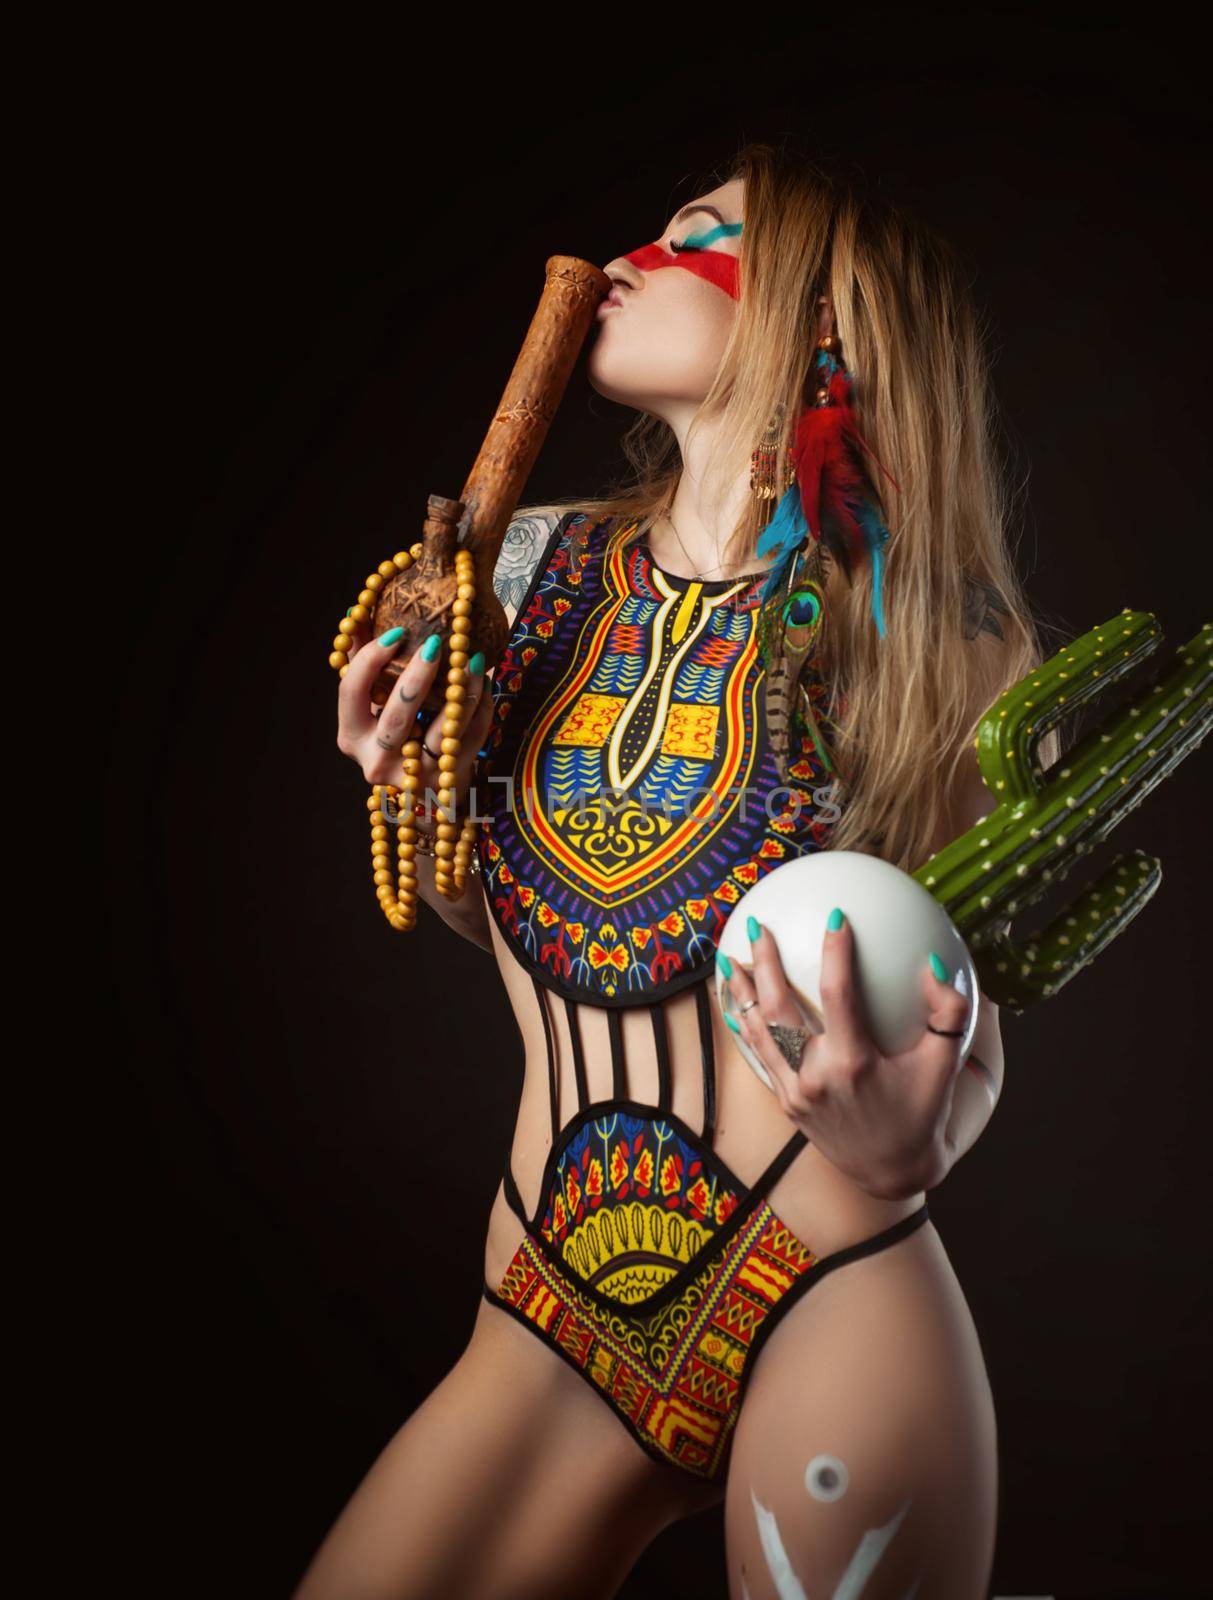 sexy hippie girl posing with bong for smoking marijuana in a bright swimsuit on a dark background by Rotozey